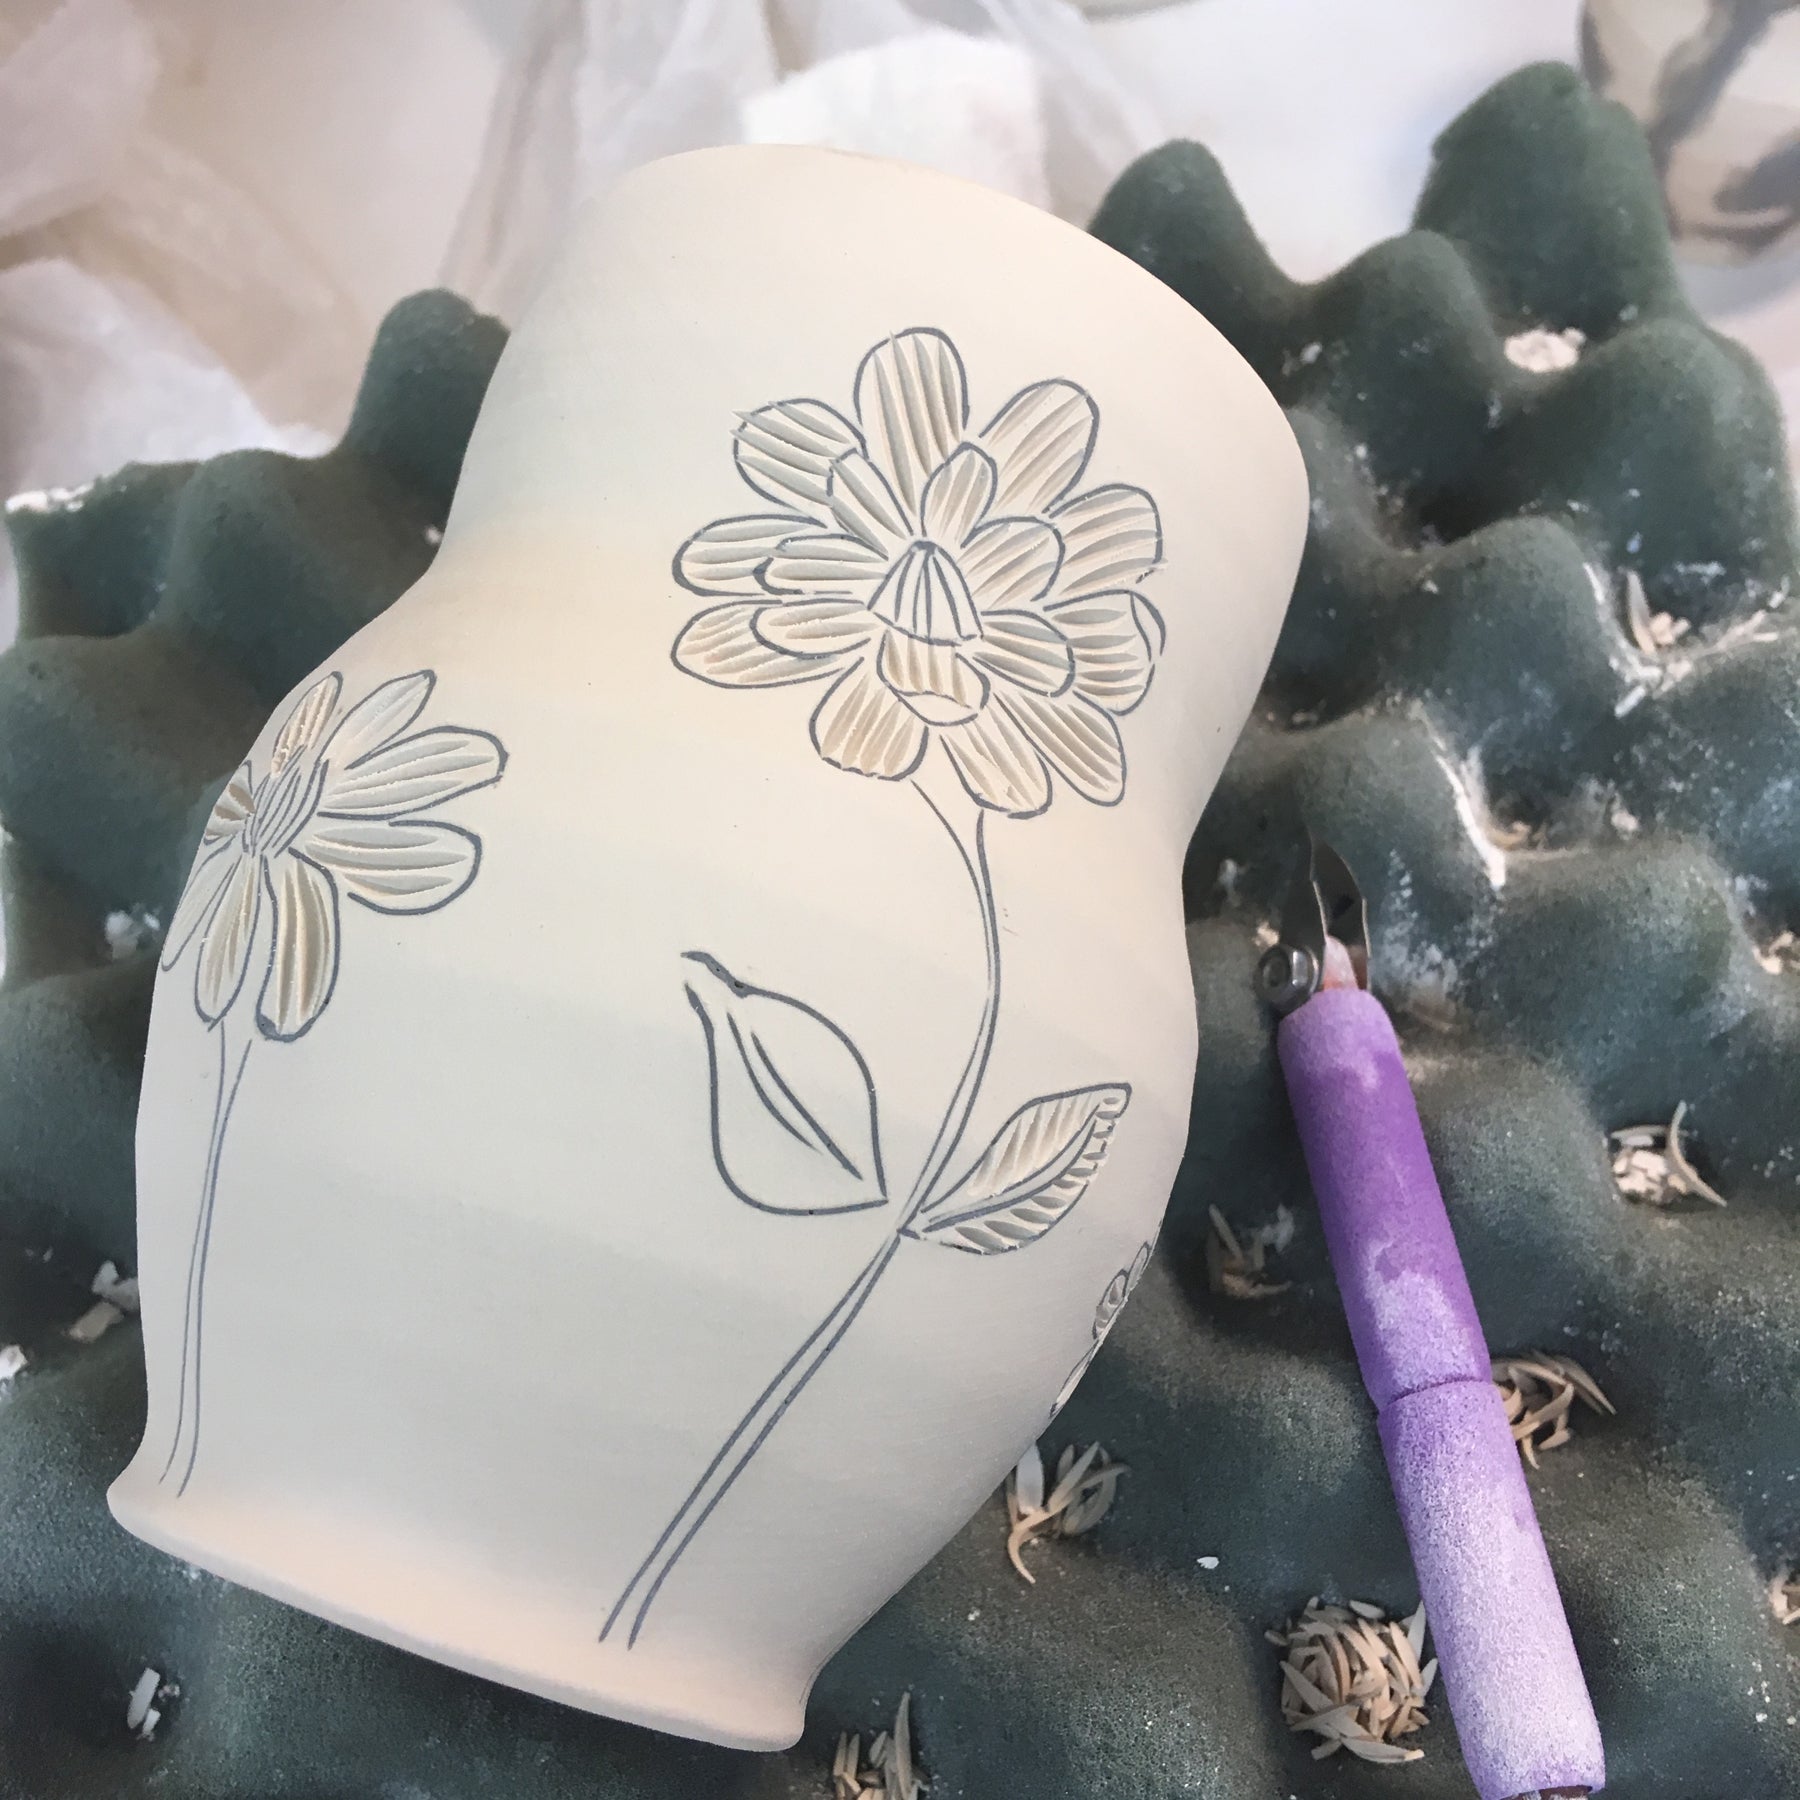 An in progress porcelain cup in sitting on foam with a carving tool laying next to it. the cup has a floral pattern carved into it.